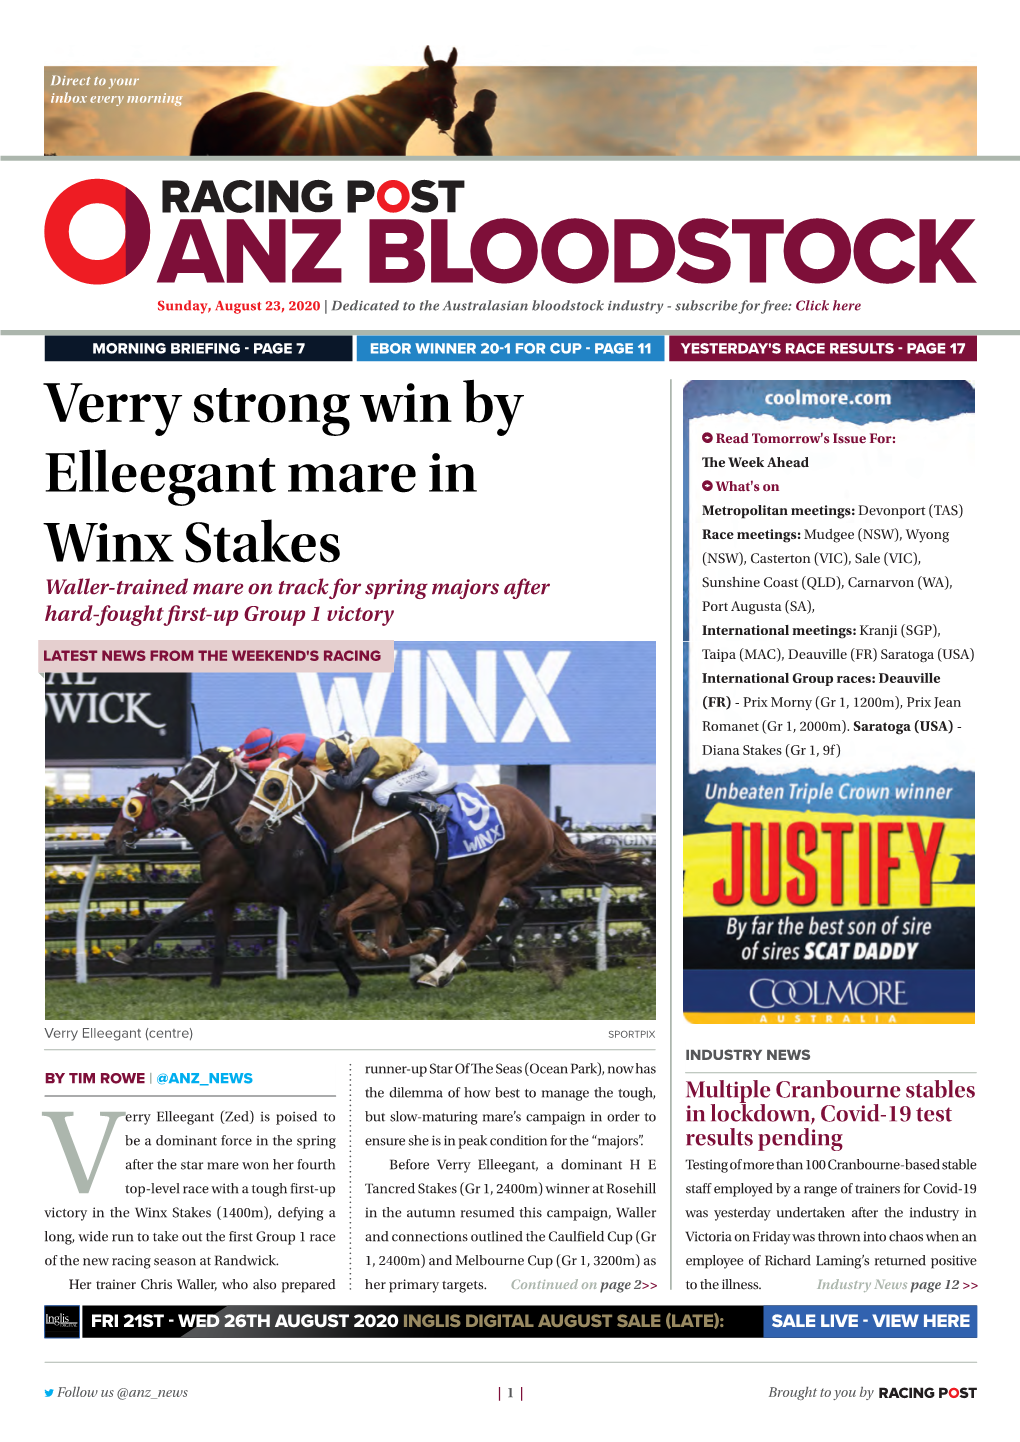 Verry Strong Win by Elleegant Mare in Winx Stakes | 2 | Sunday, August 23, 2020